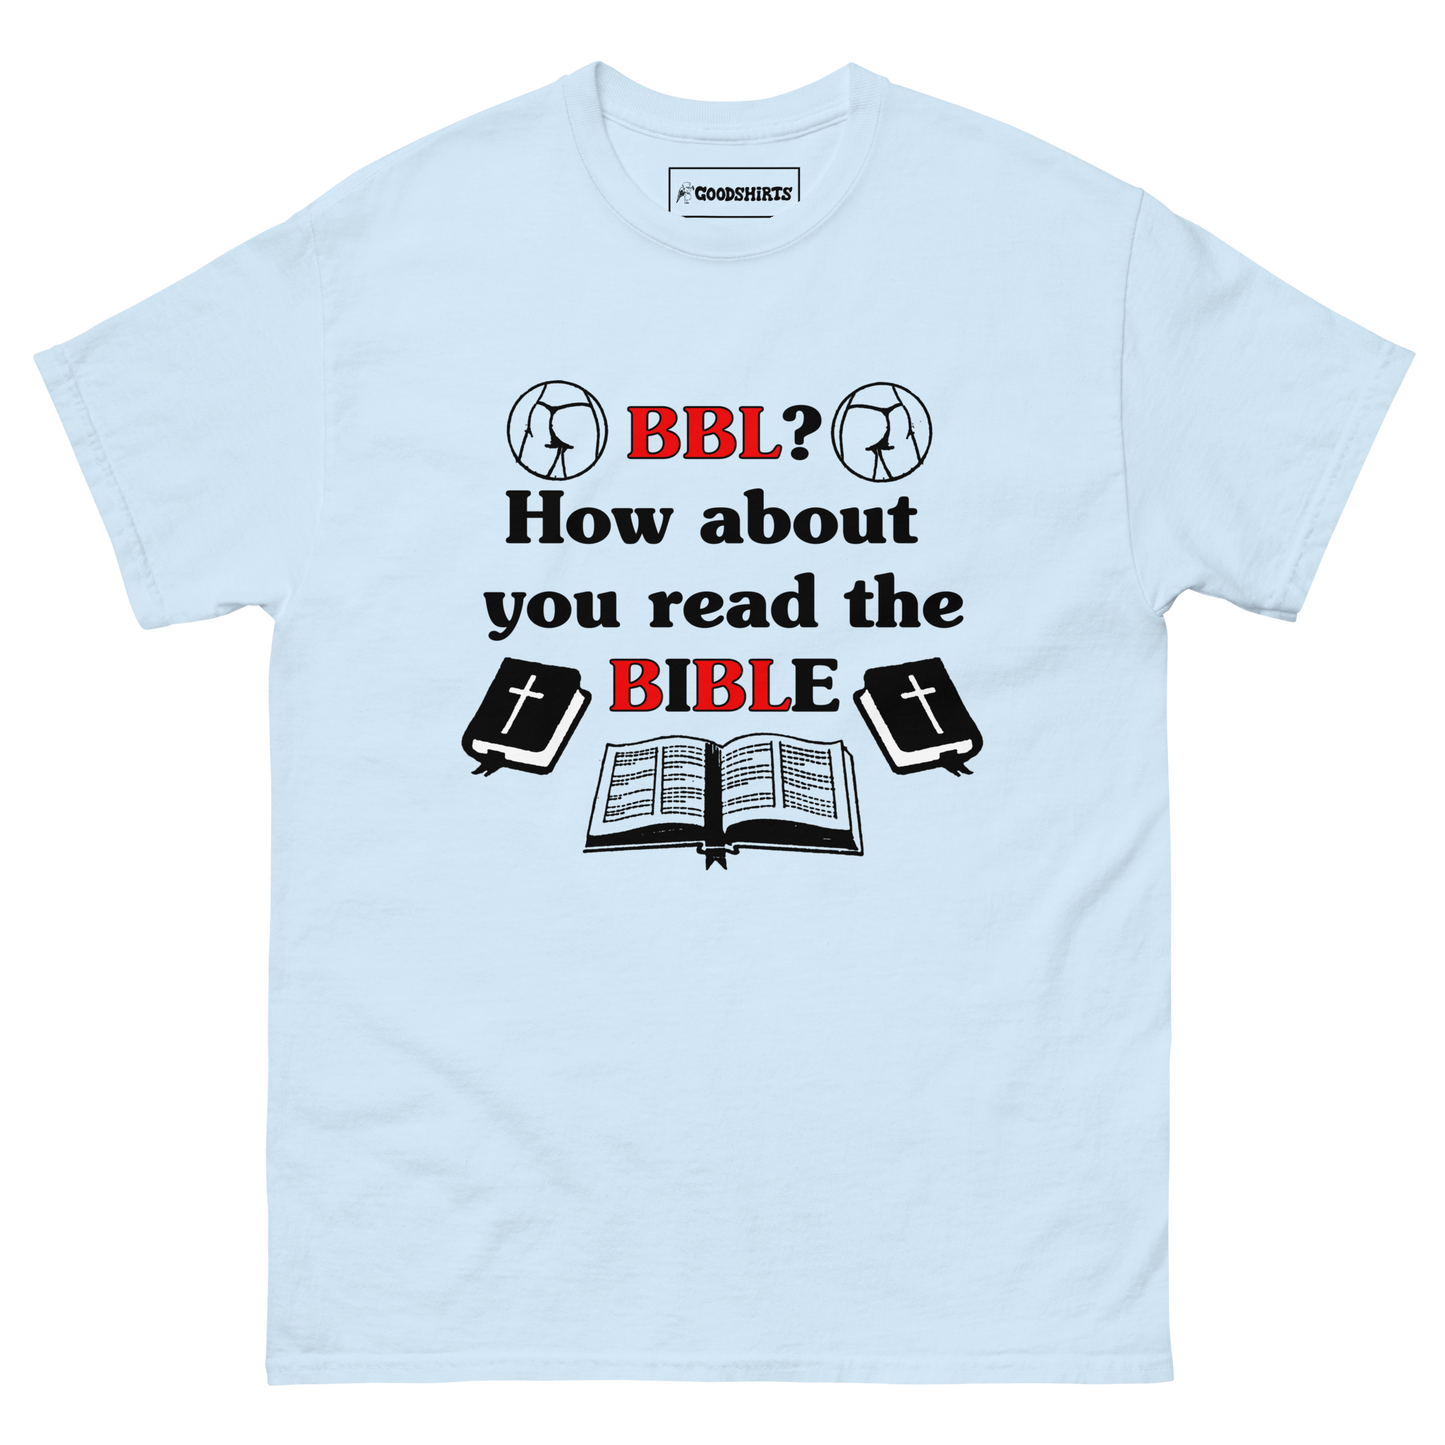 BBL? How About You Read The Bible.